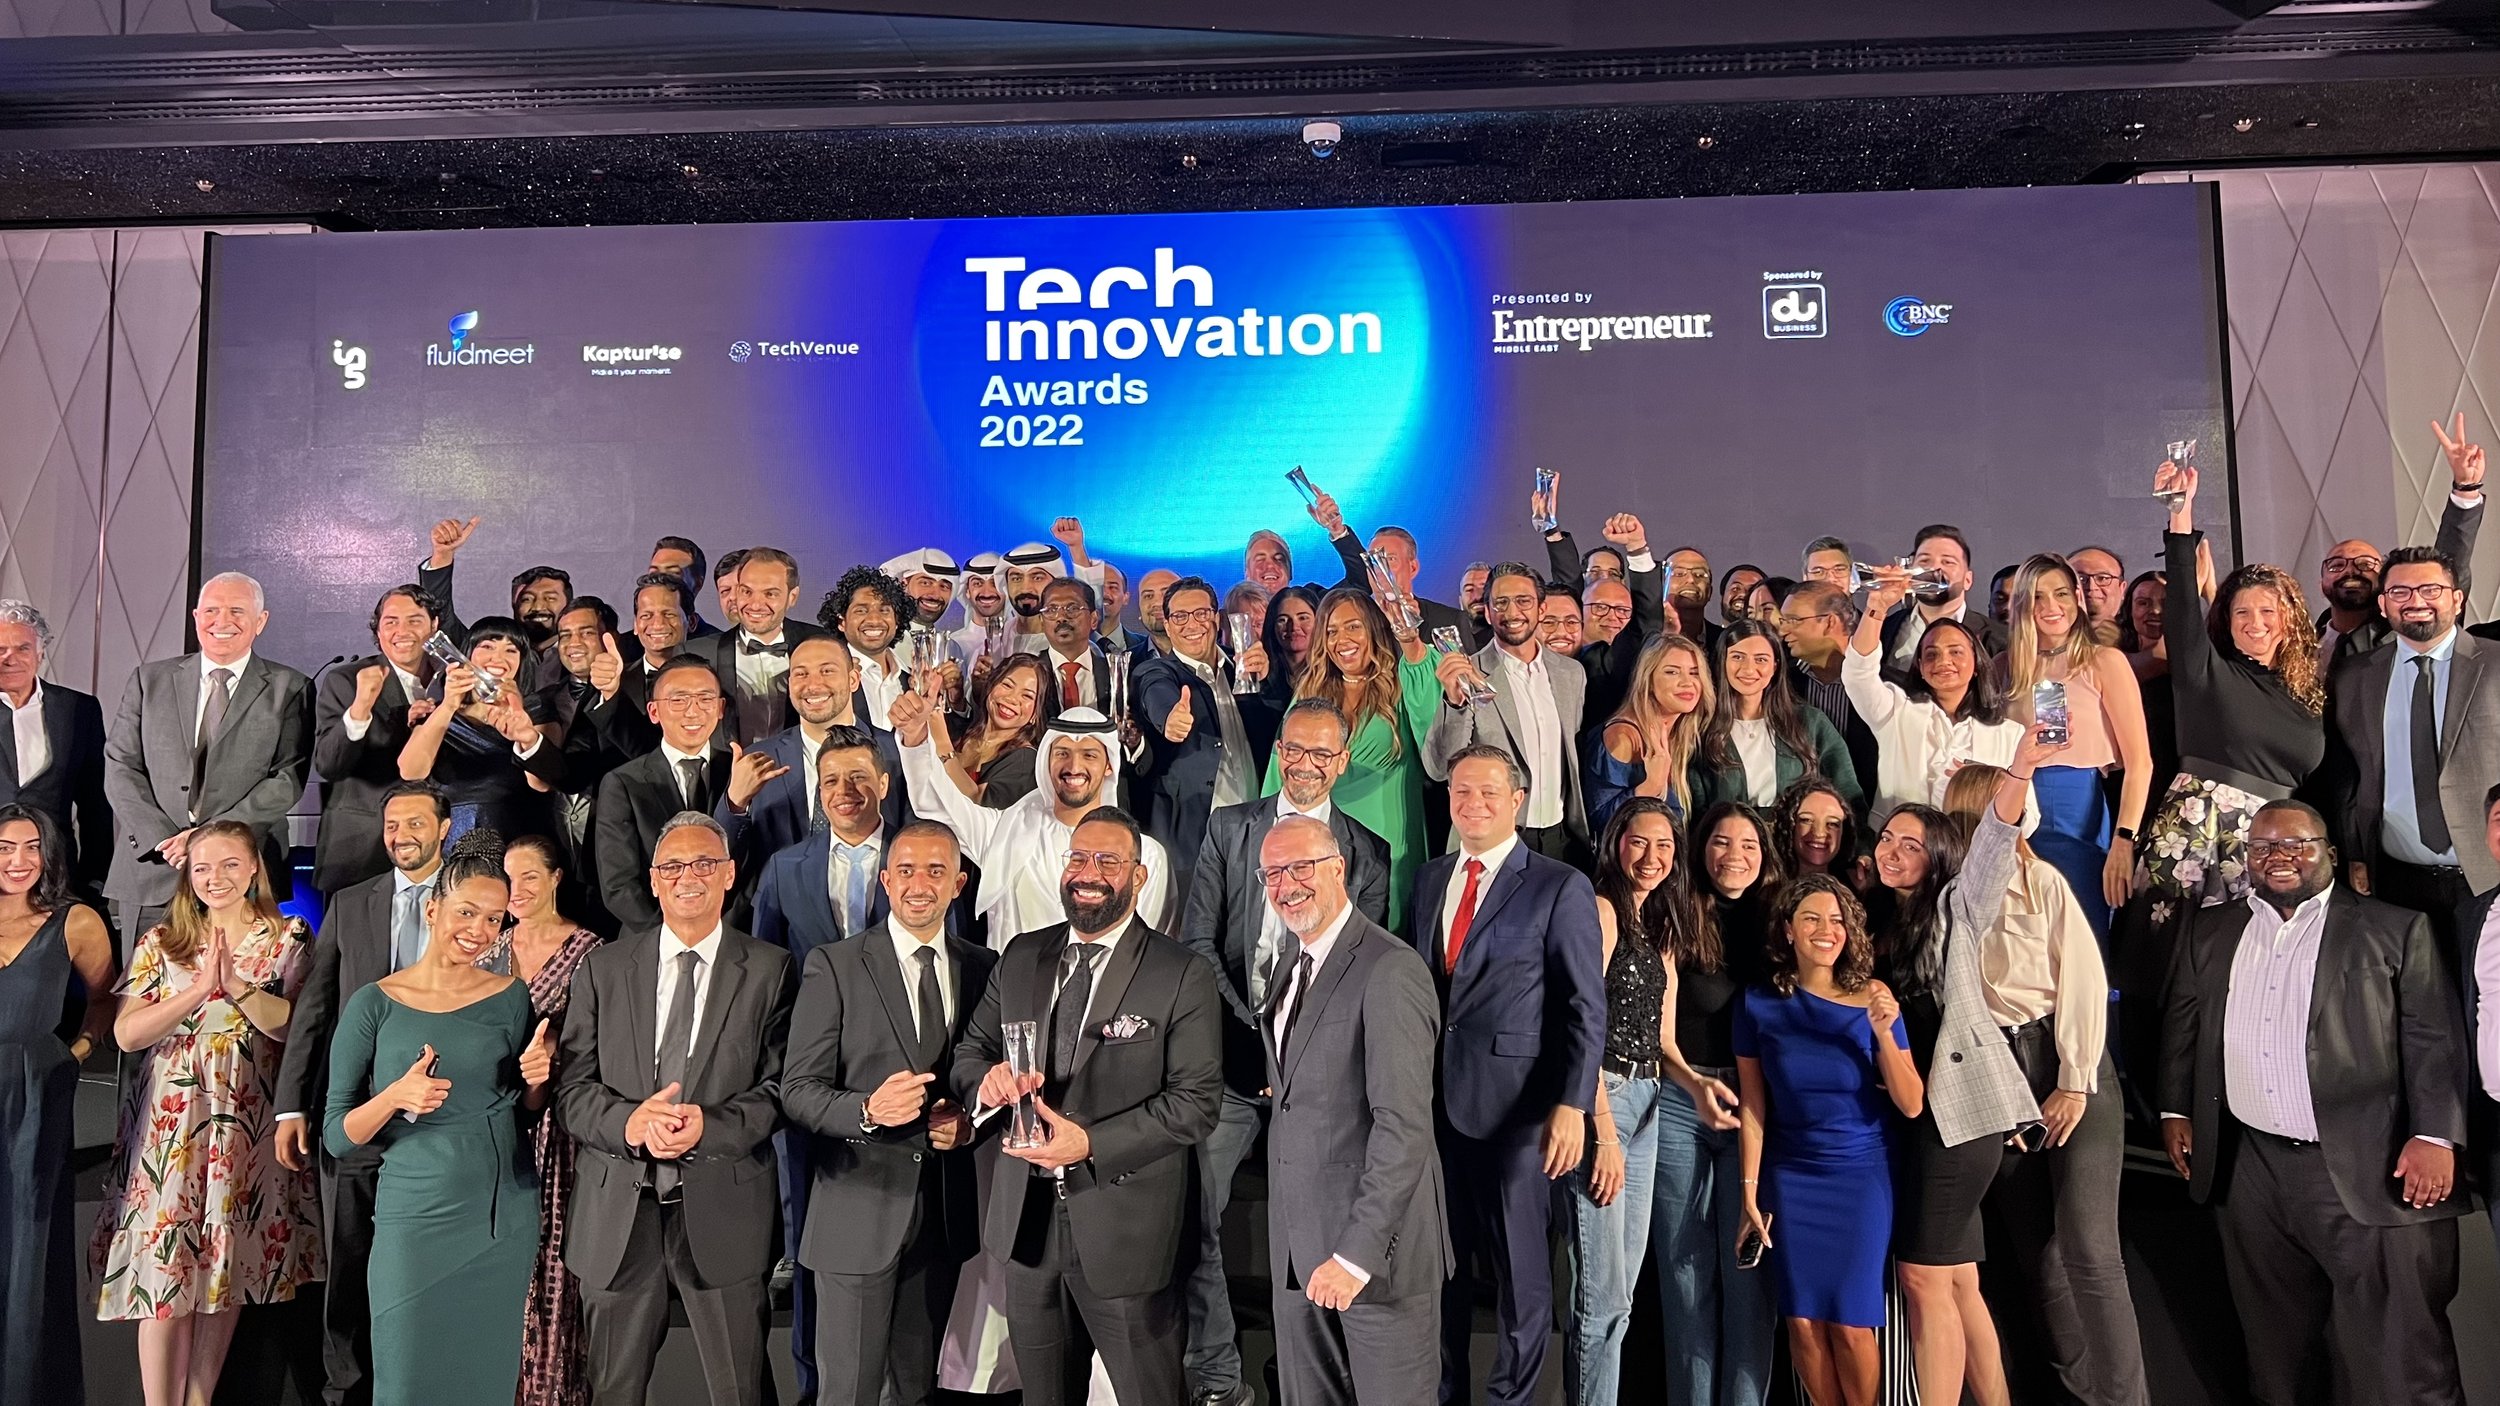 The winners of the Tech Innovation Awards 2022 on stage.